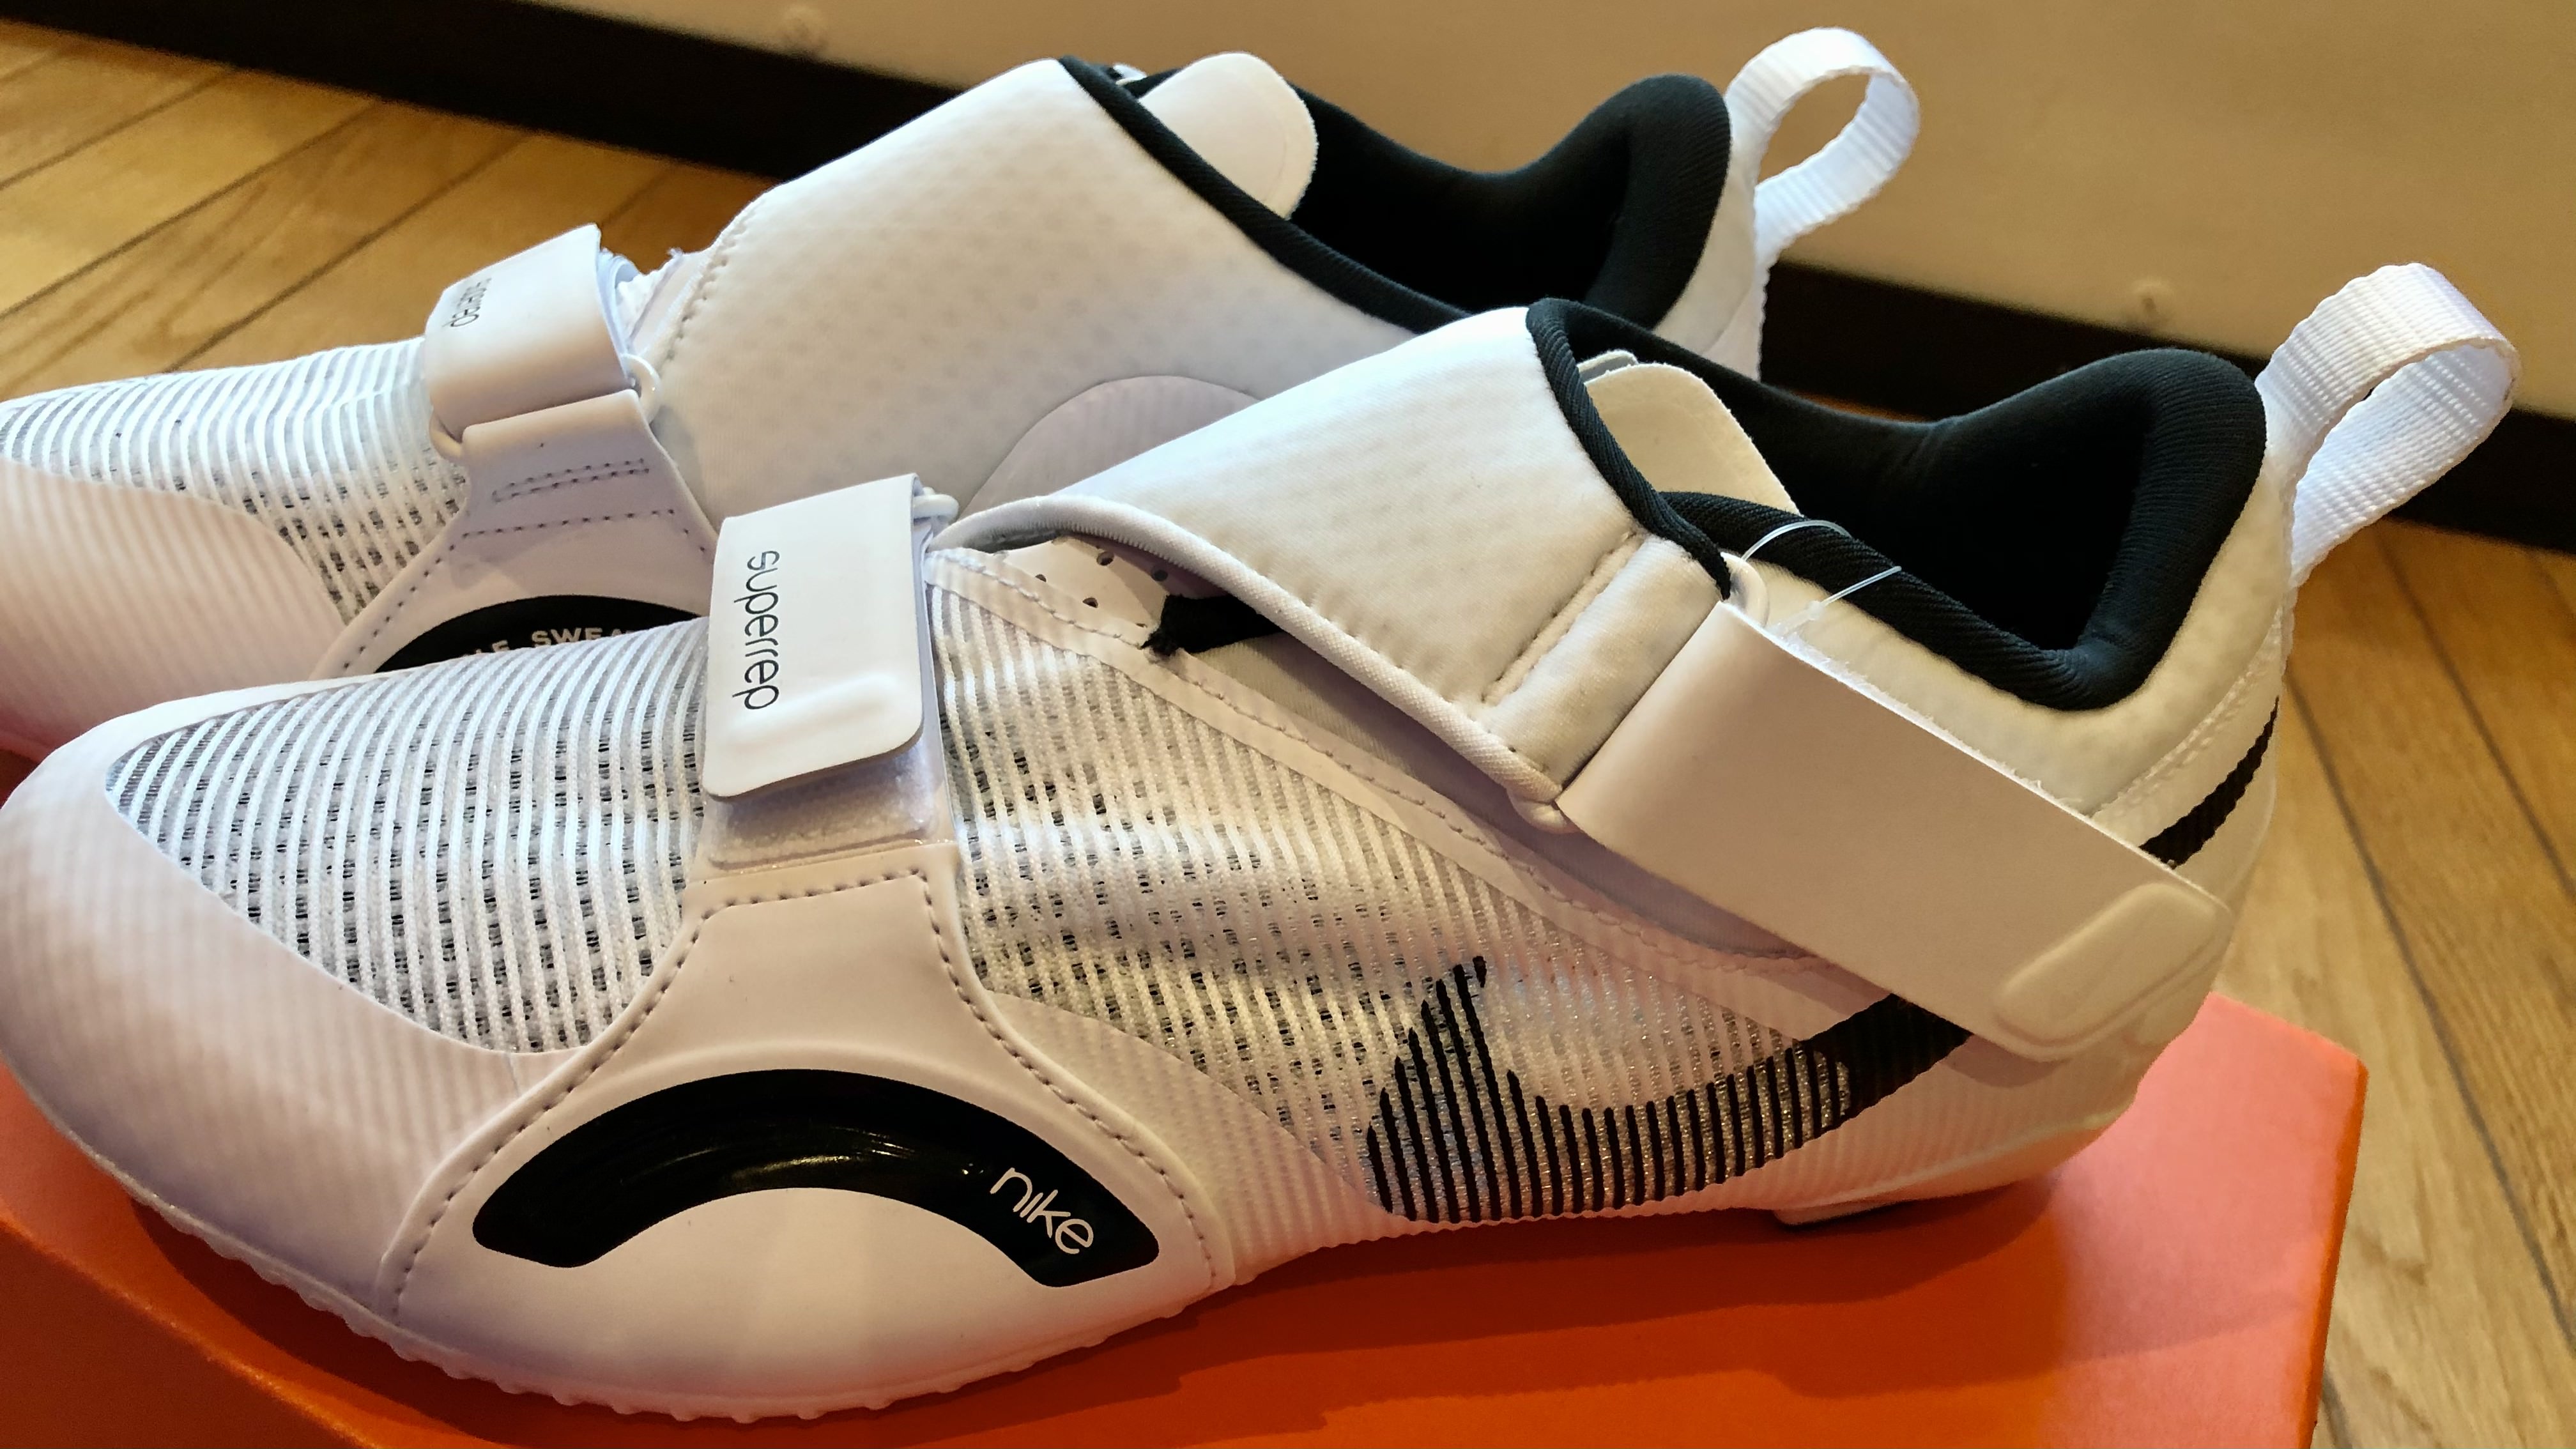 A close-up of the Nike SuperRep cycling shoes